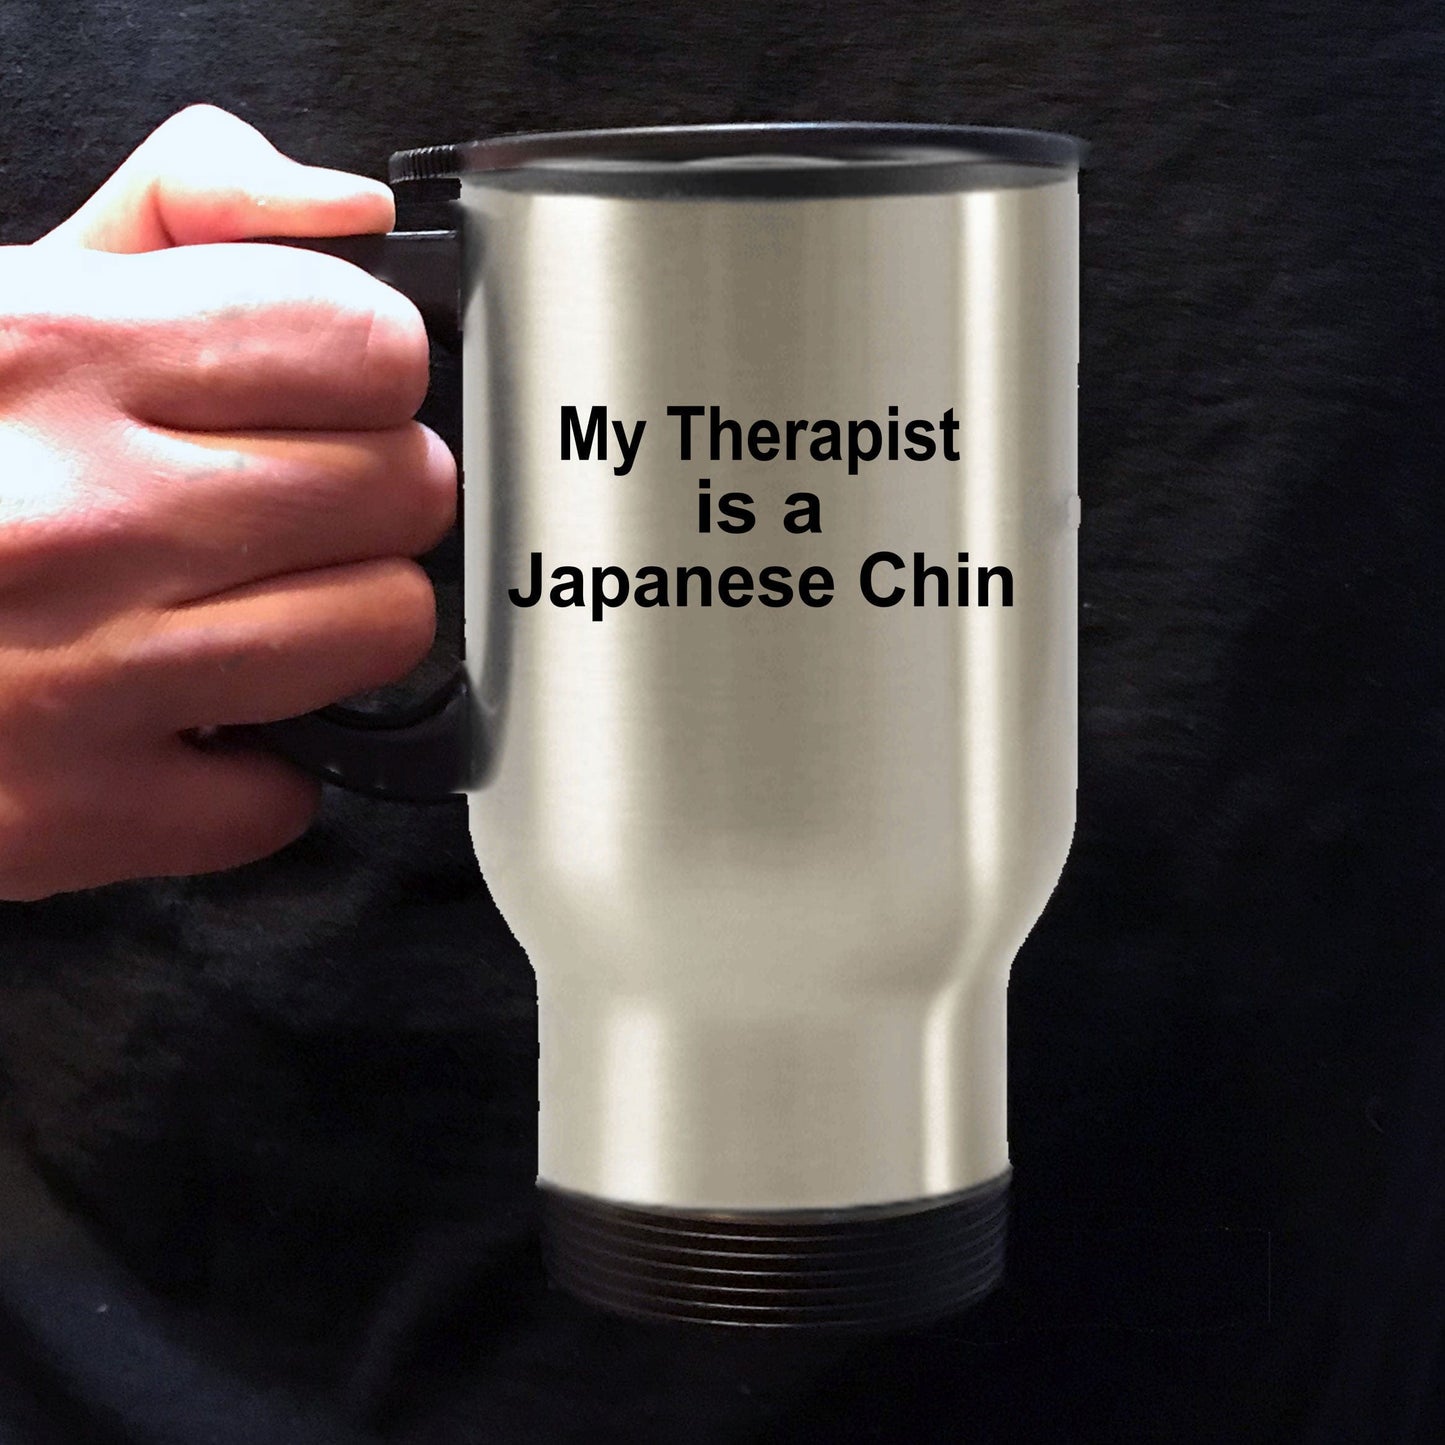 Japanese Chin Dog Owner Lover Funny Gift Therapist Stainless Steel Insulated Travel Coffee Mug